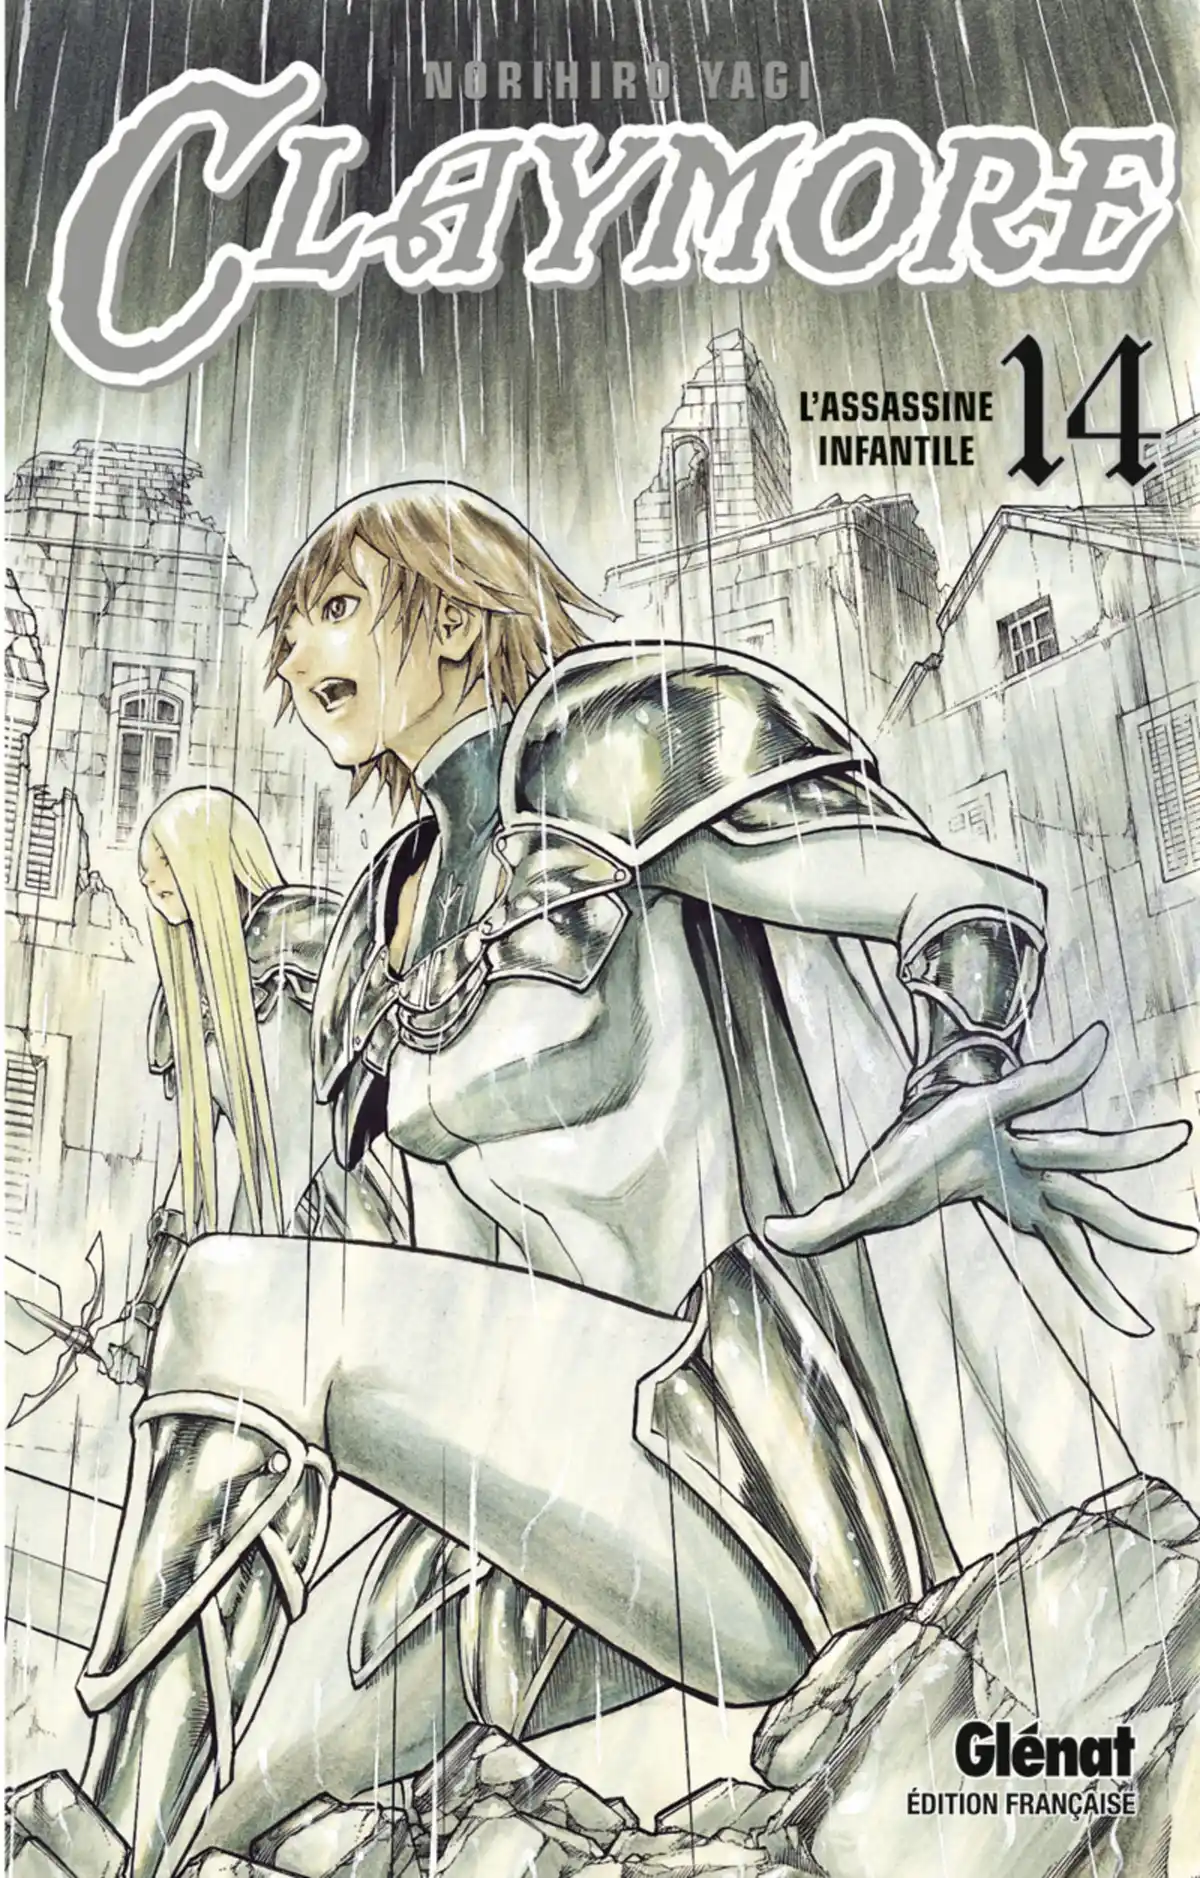 Claymore Volume 14 page 1